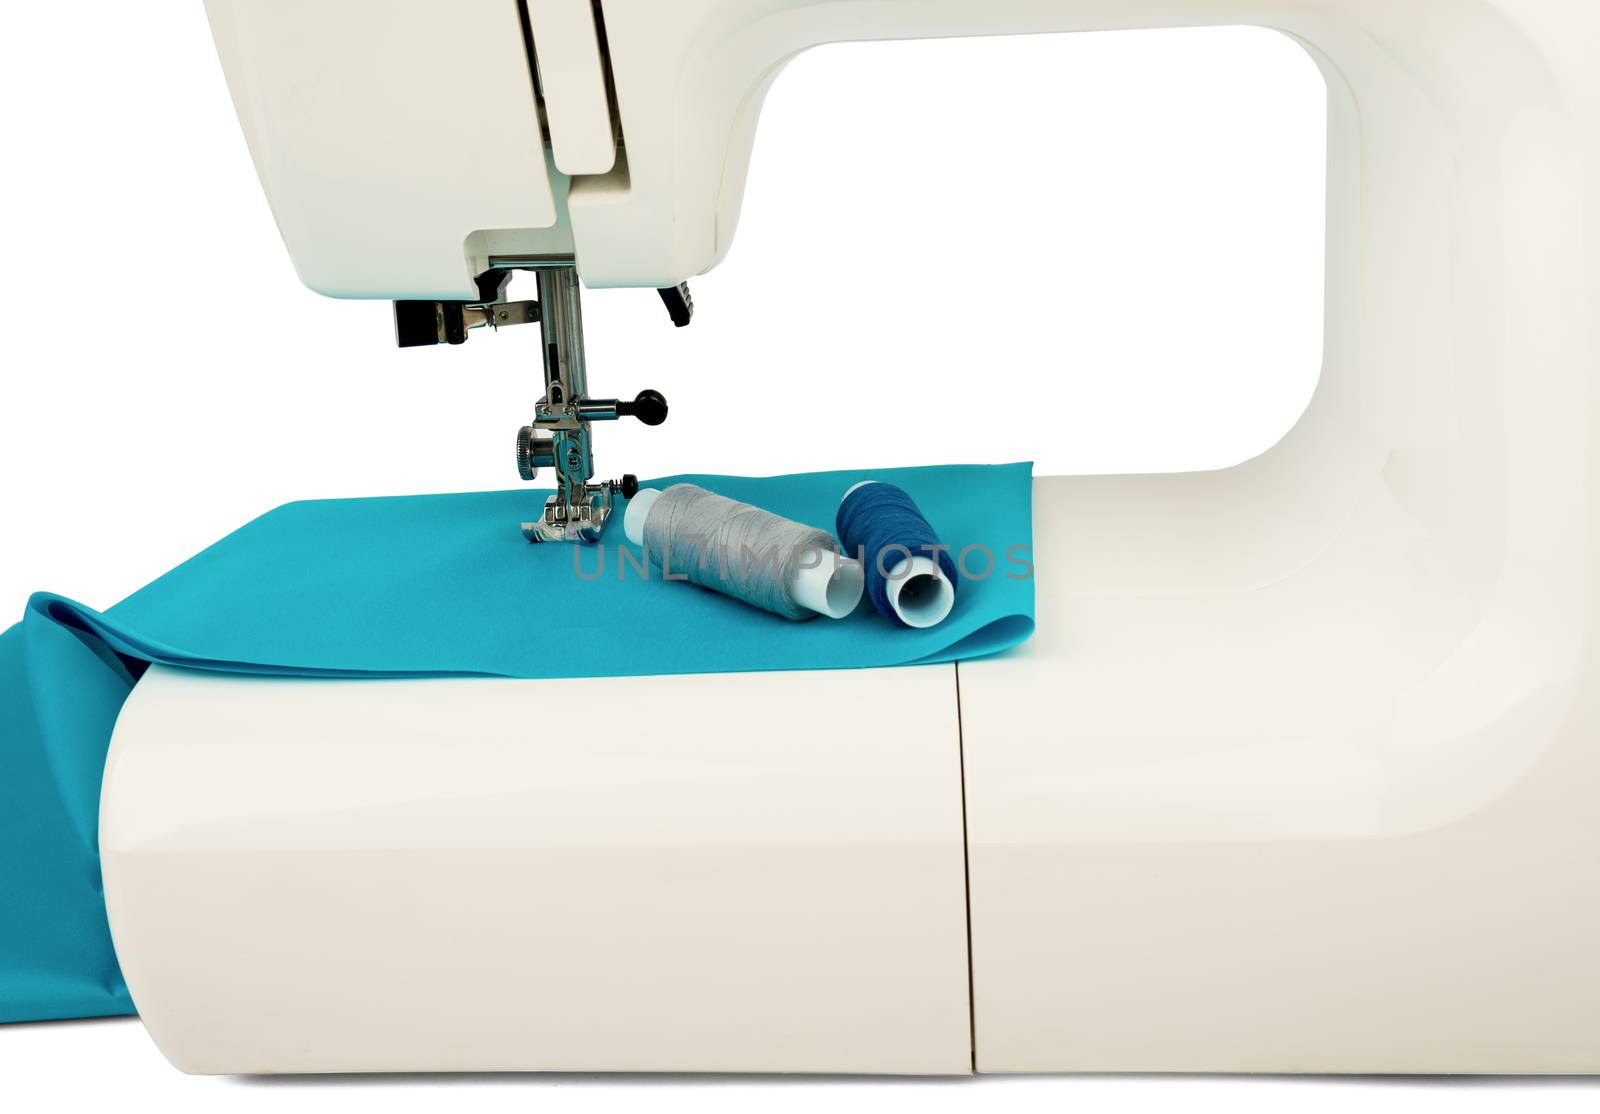 Machine sews with blue textile fabric on white background